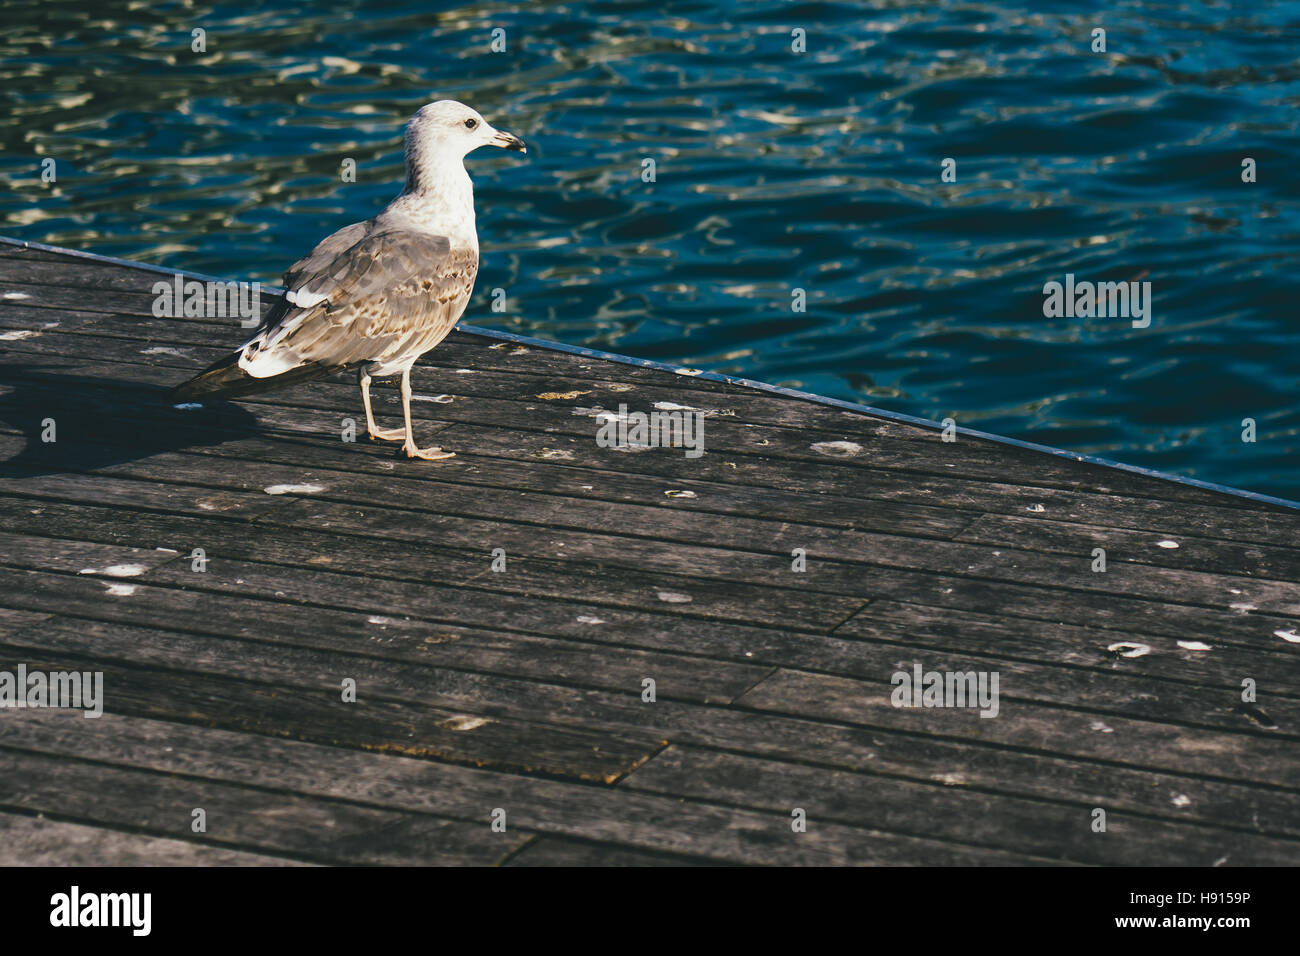 A seagull standing in a wooden jetty by the sea. Stock Photo